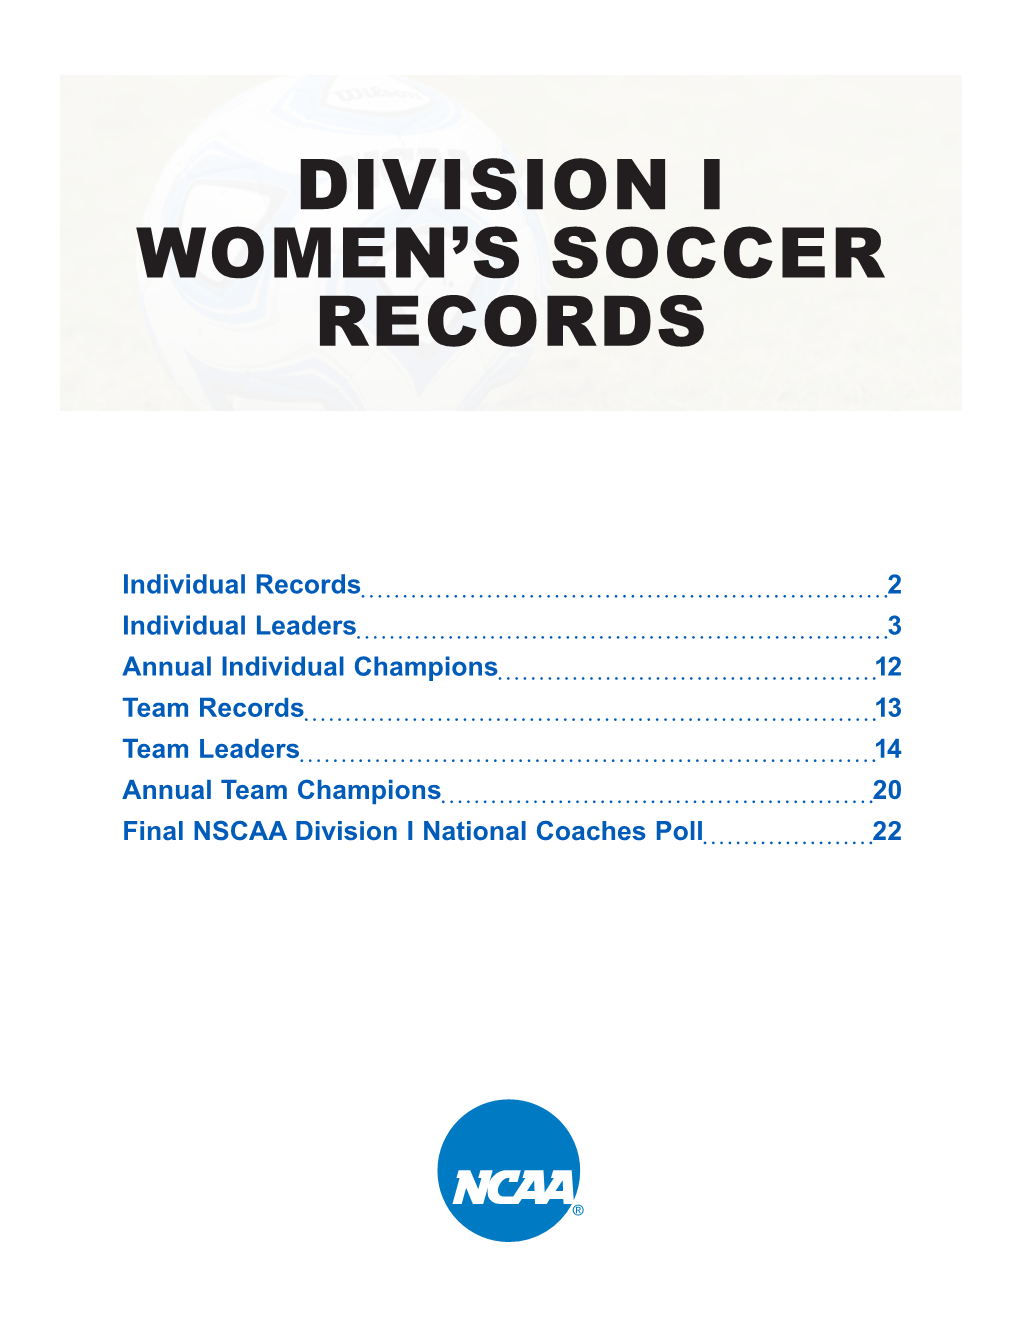 Division I Women's Soccer Records